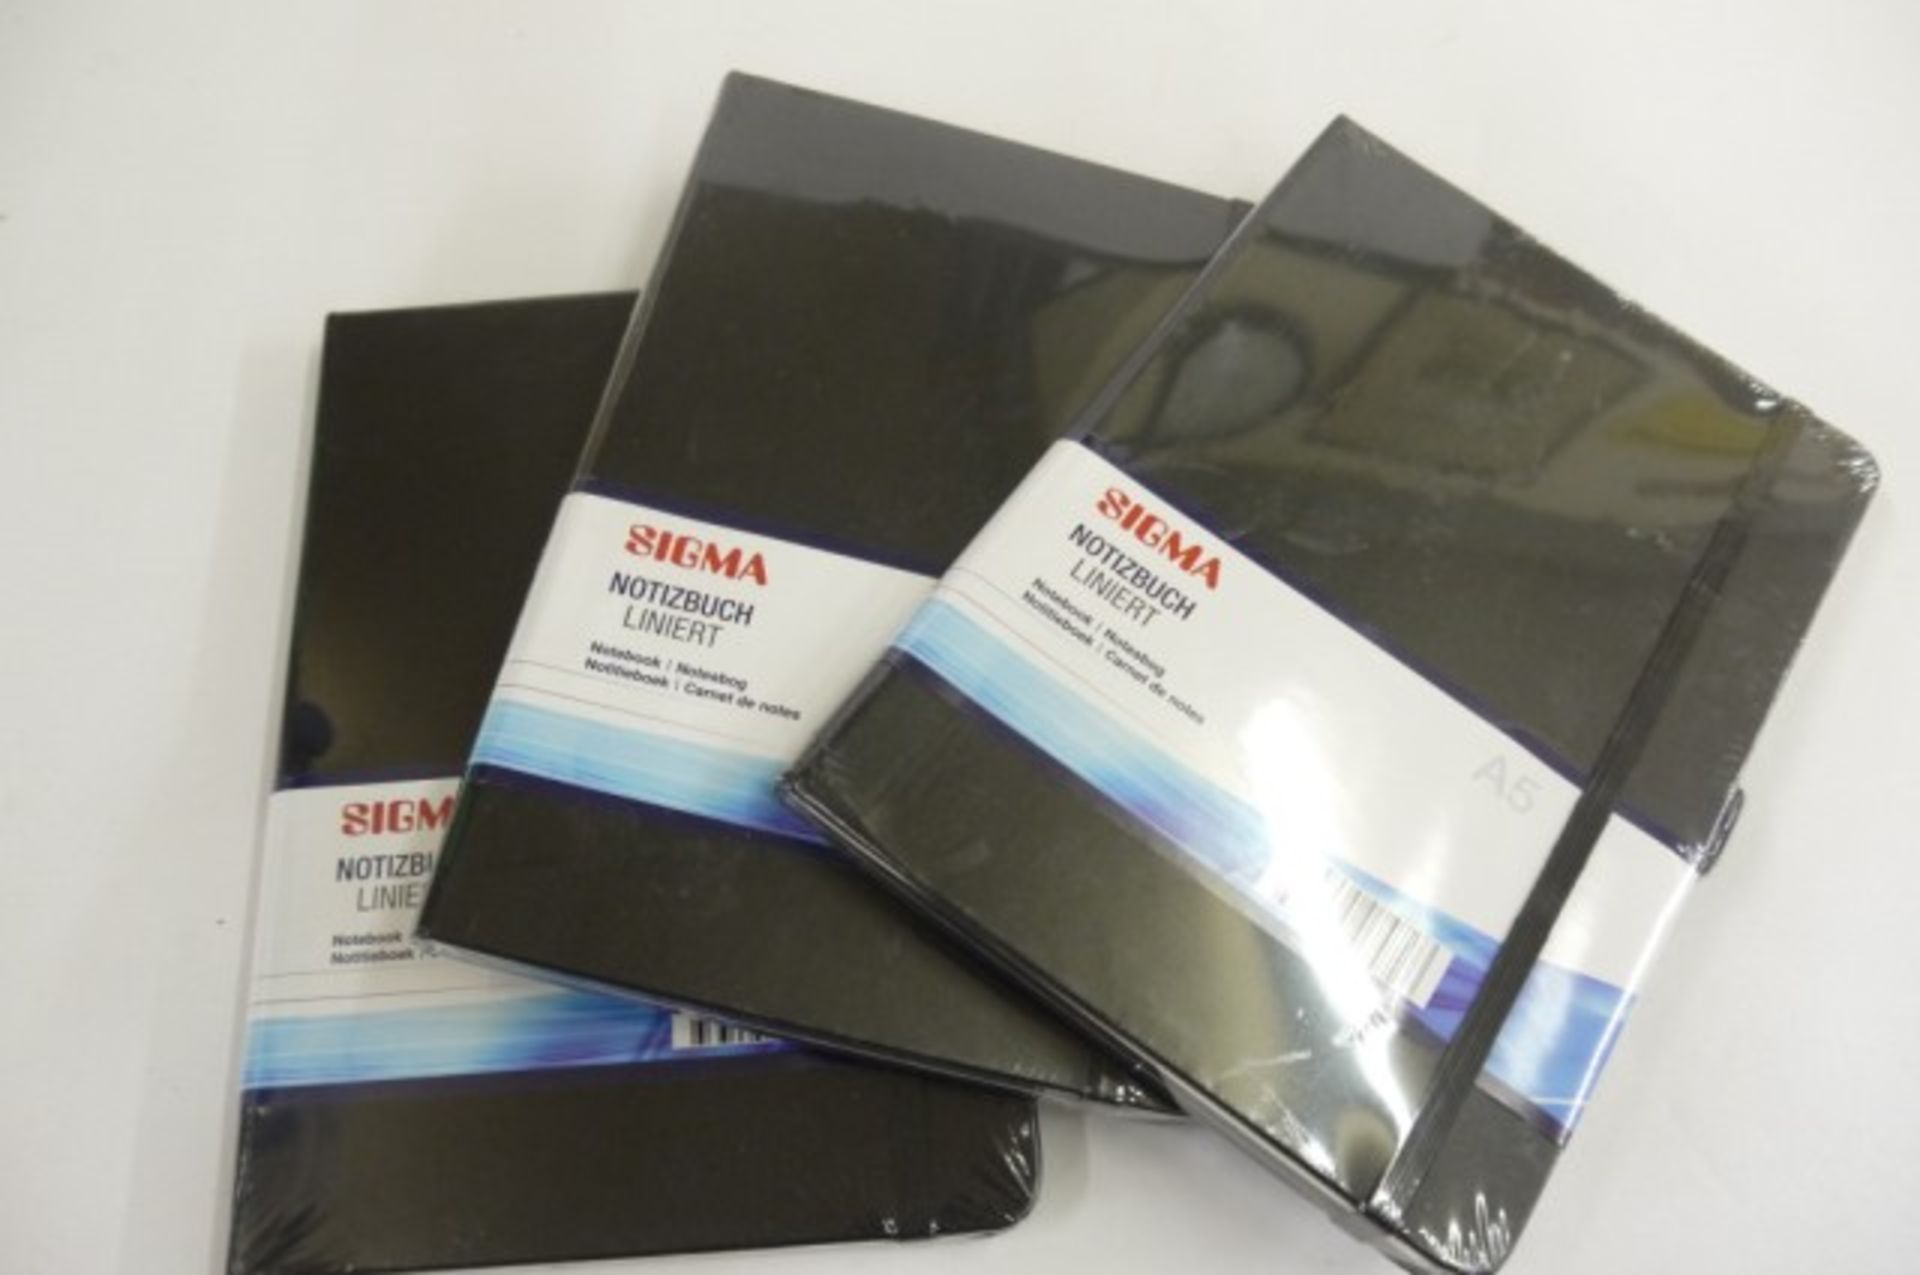 V *TRADE QTY* Brand New Three Sigma A5 Notebook Lined 192 Pages Hard Case X 3 YOUR BID PRICE TO BE